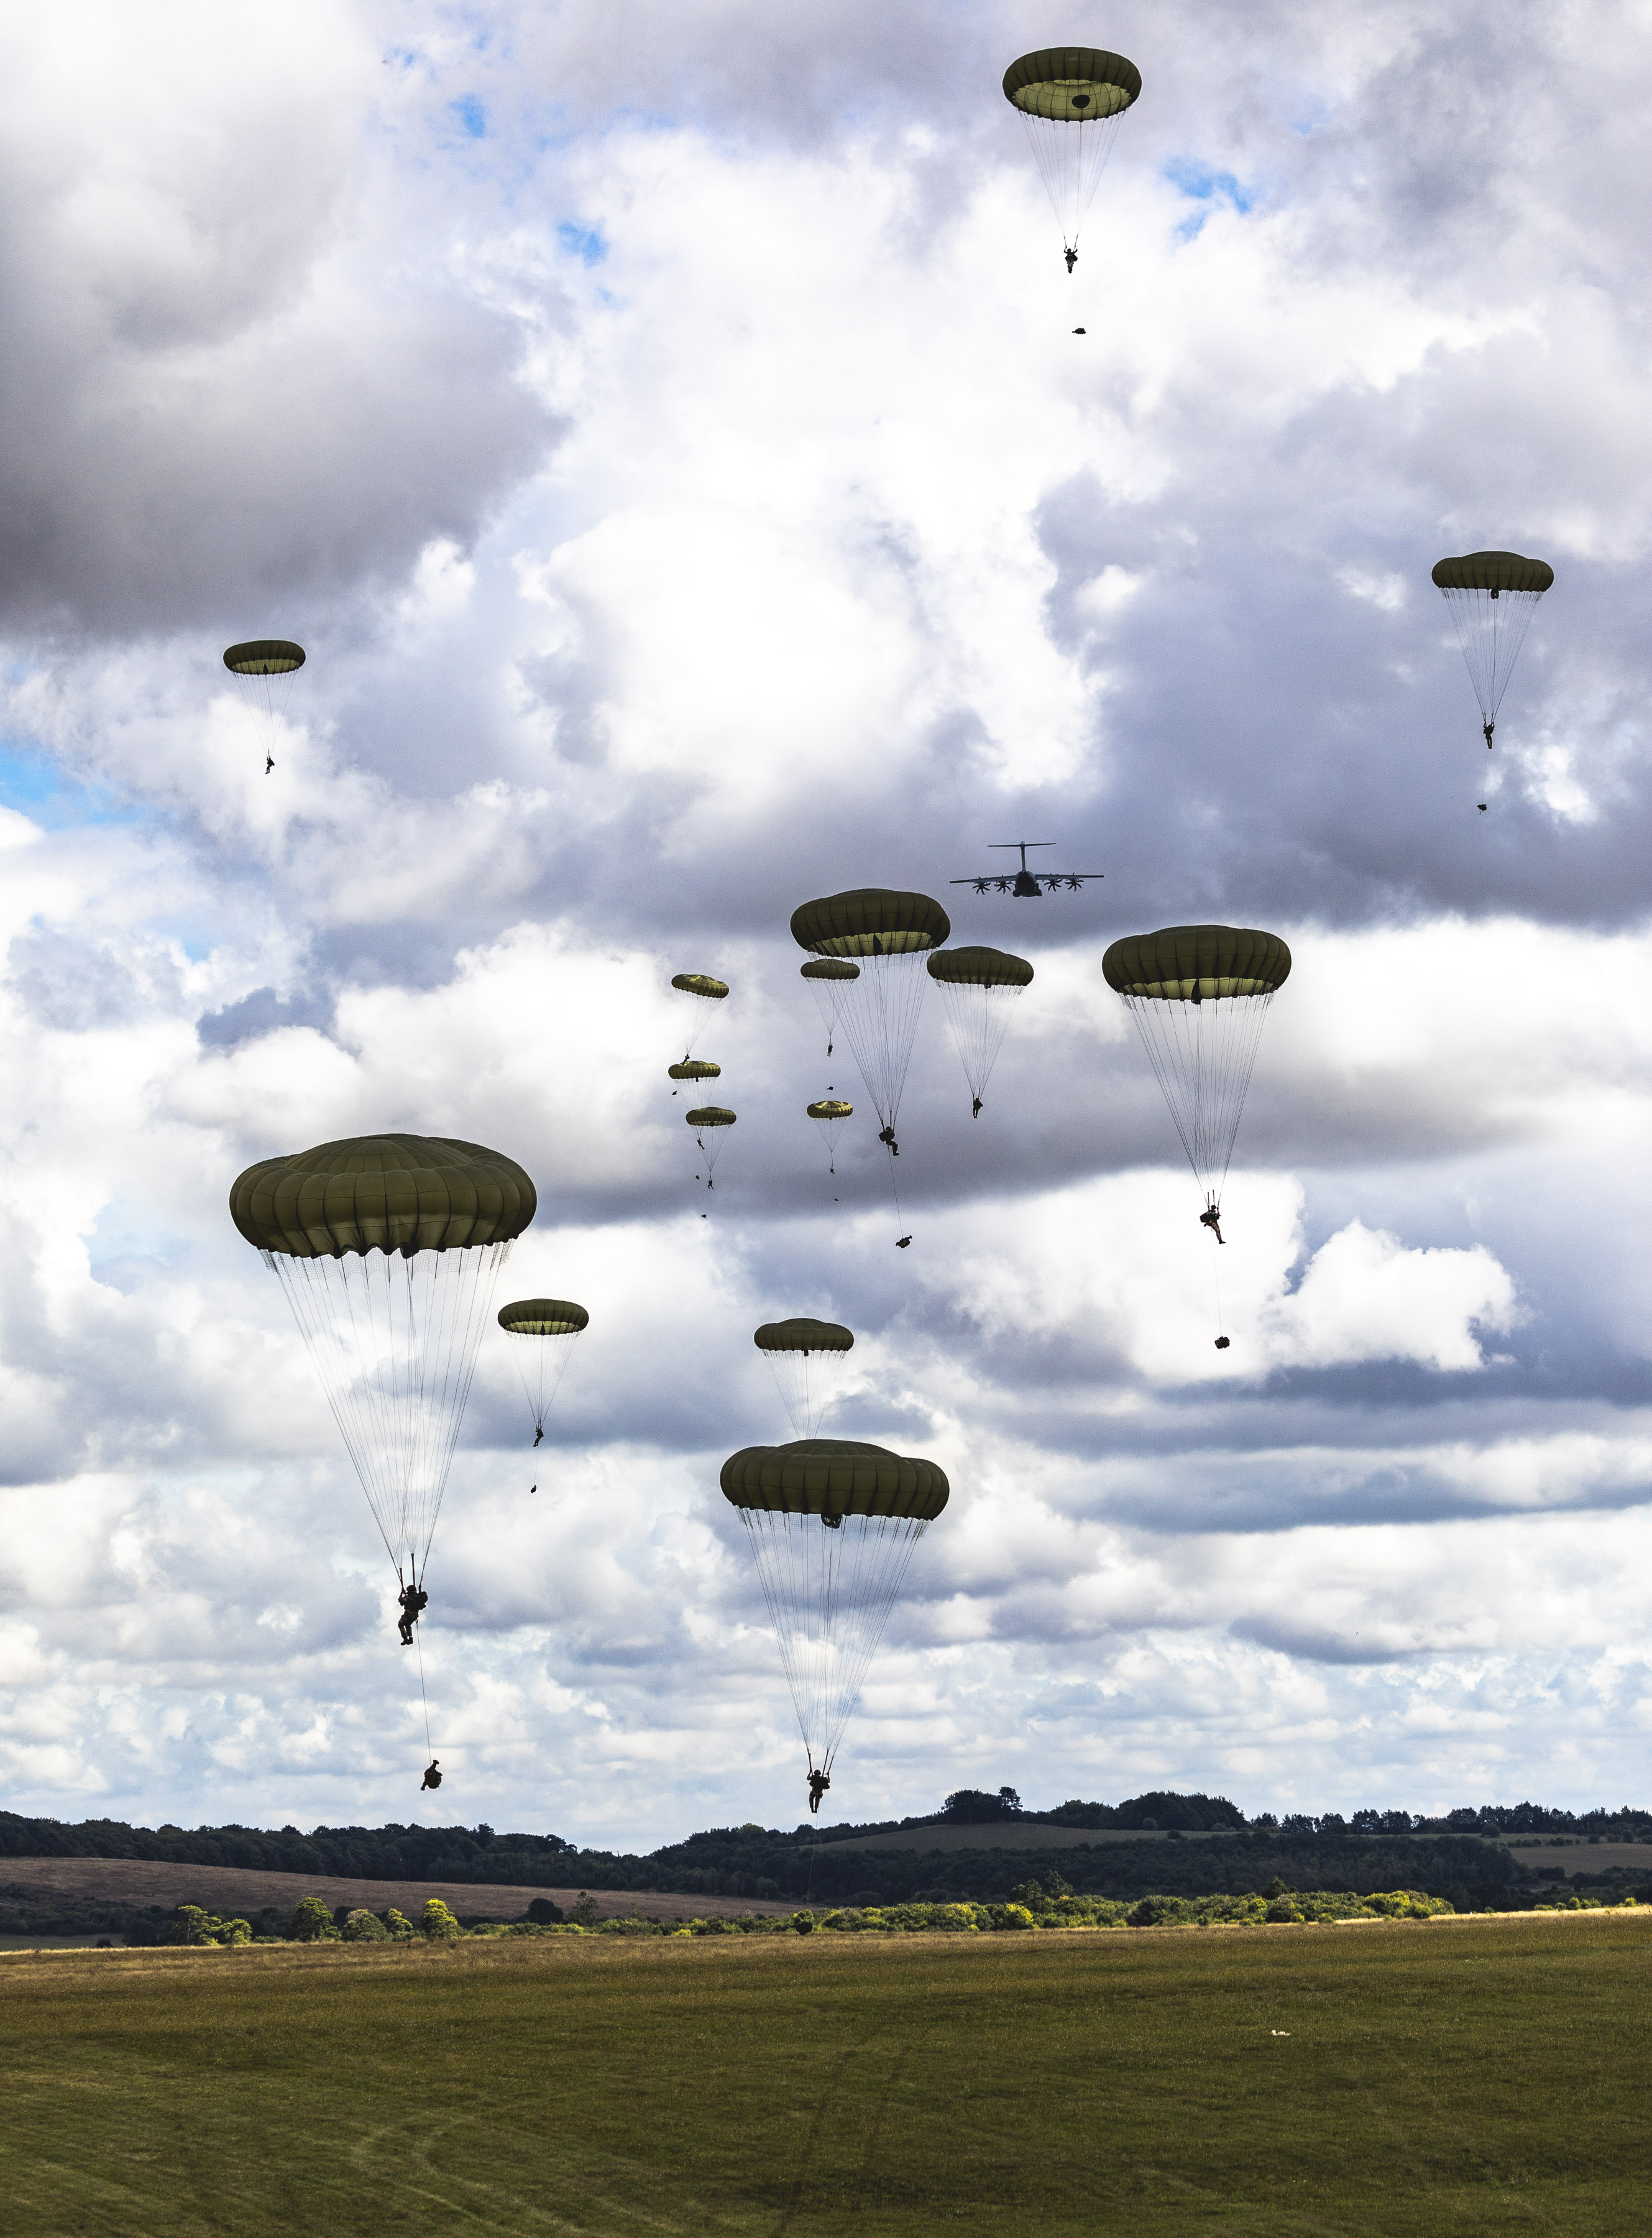 Image shows parachutist coming in to land on the ground.